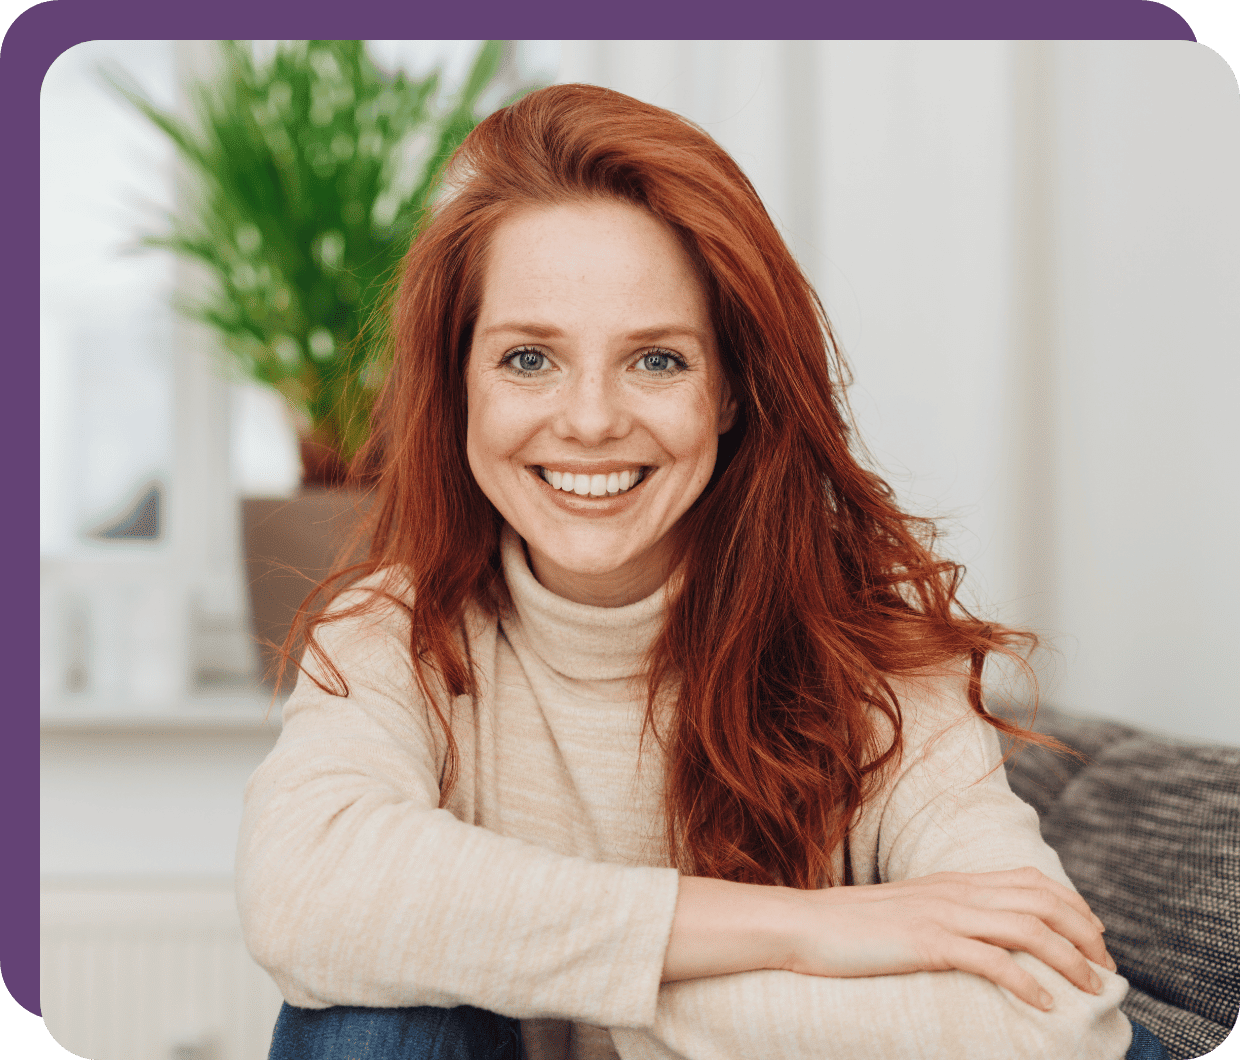 happy young woman with bright red hair smiles thanks to reduce pain due to TMJ